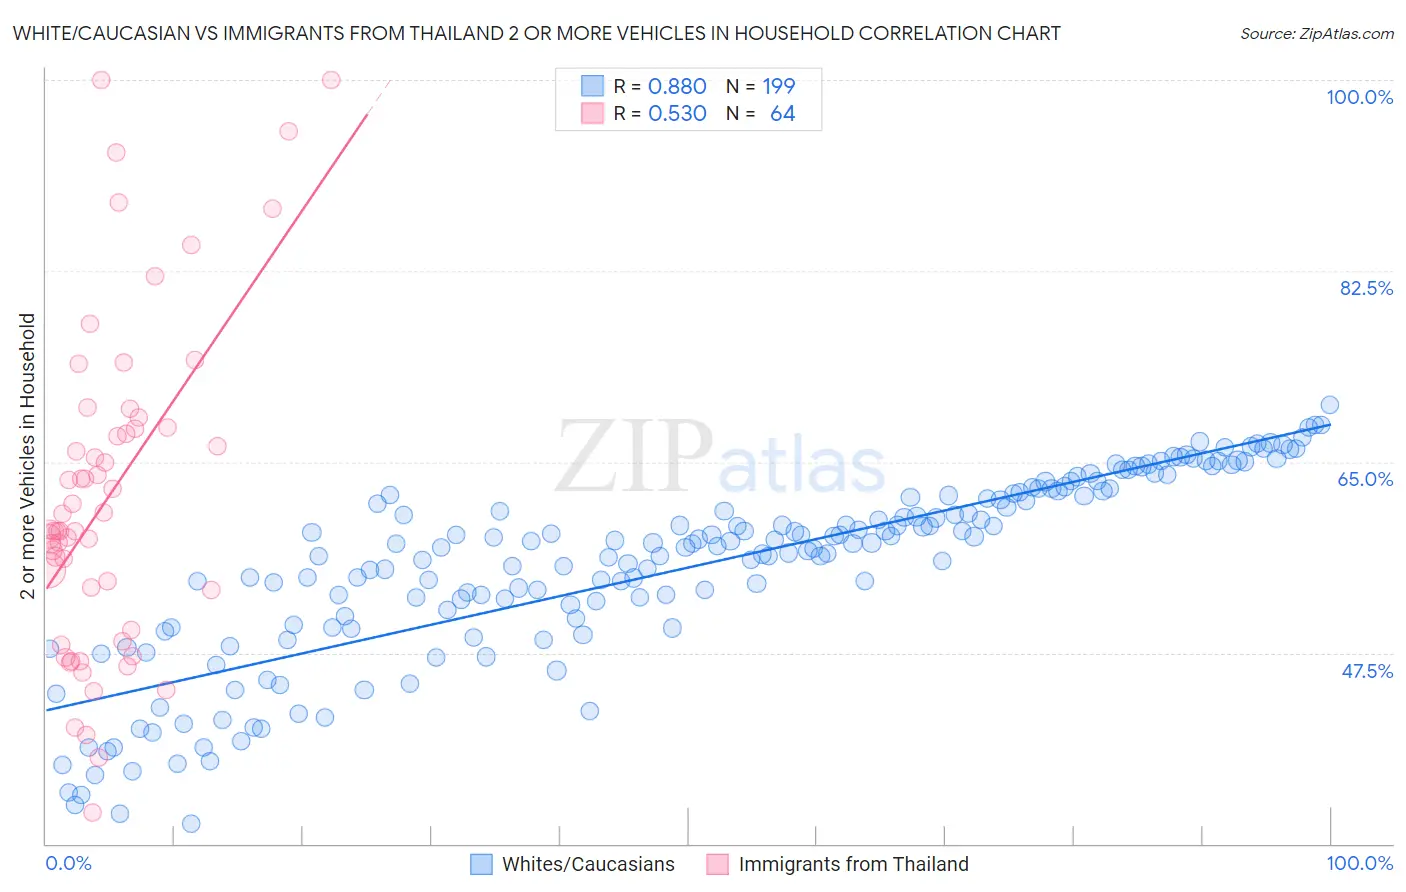 White/Caucasian vs Immigrants from Thailand 2 or more Vehicles in Household